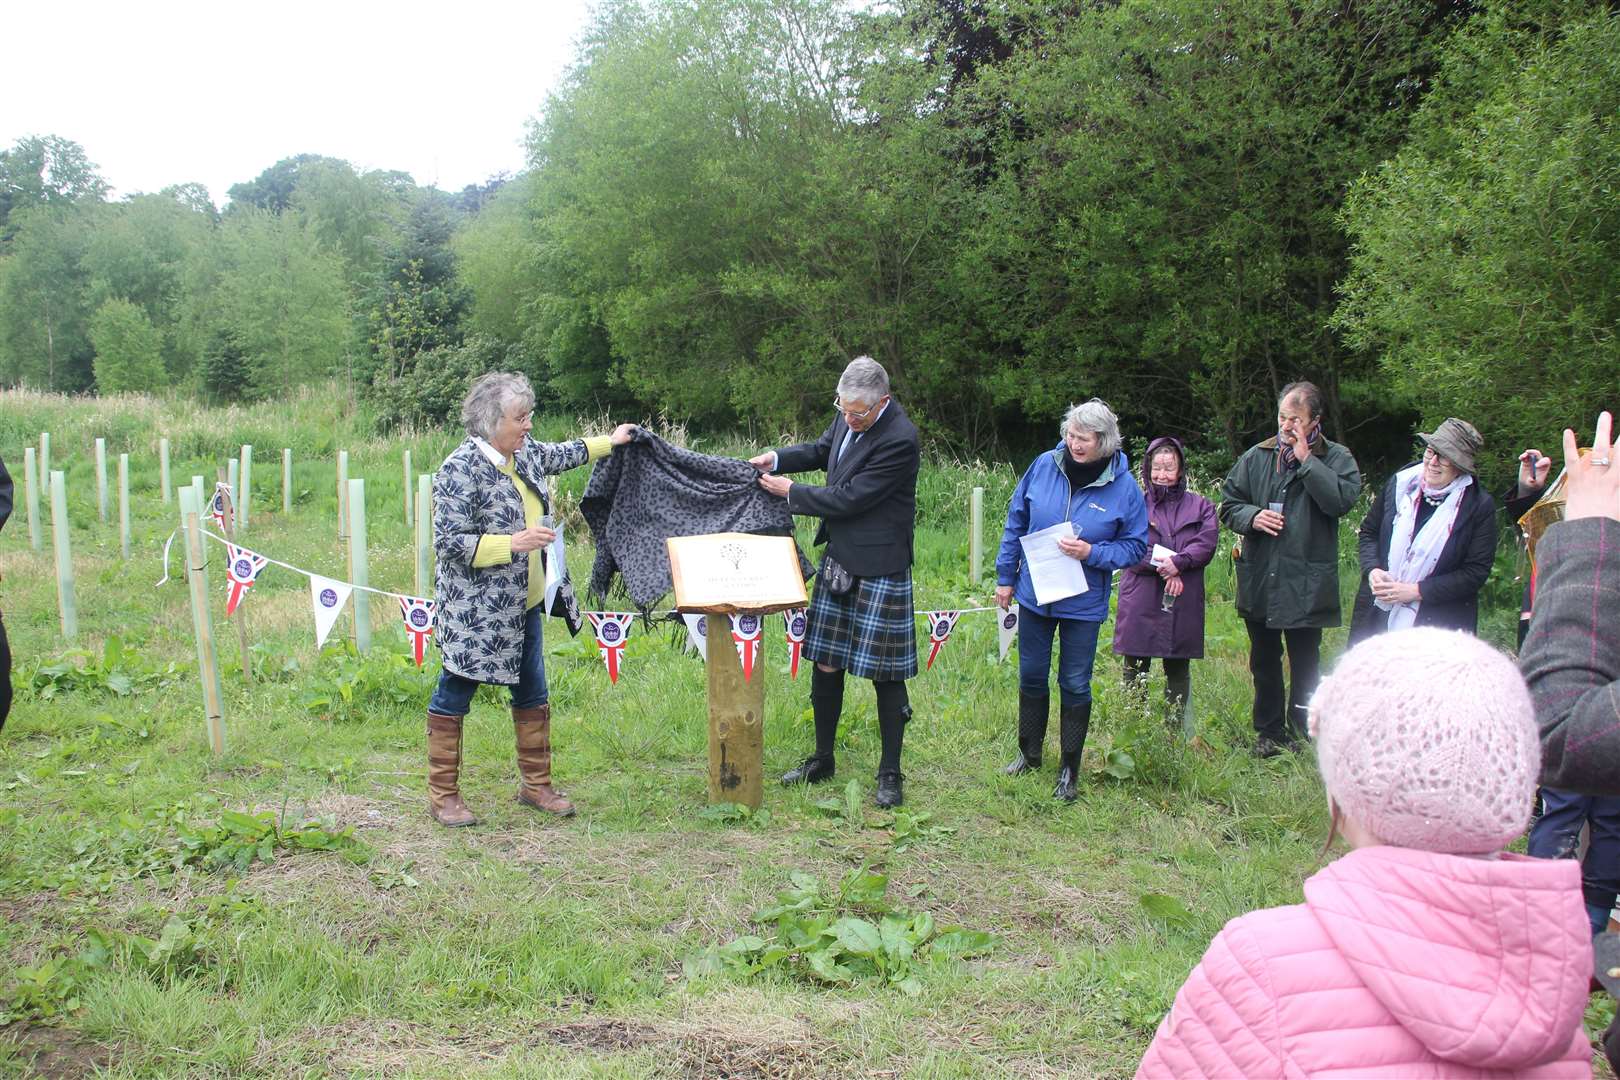 Community picnic at Mountblairy community woodland. Pictures: Kirsty Brown